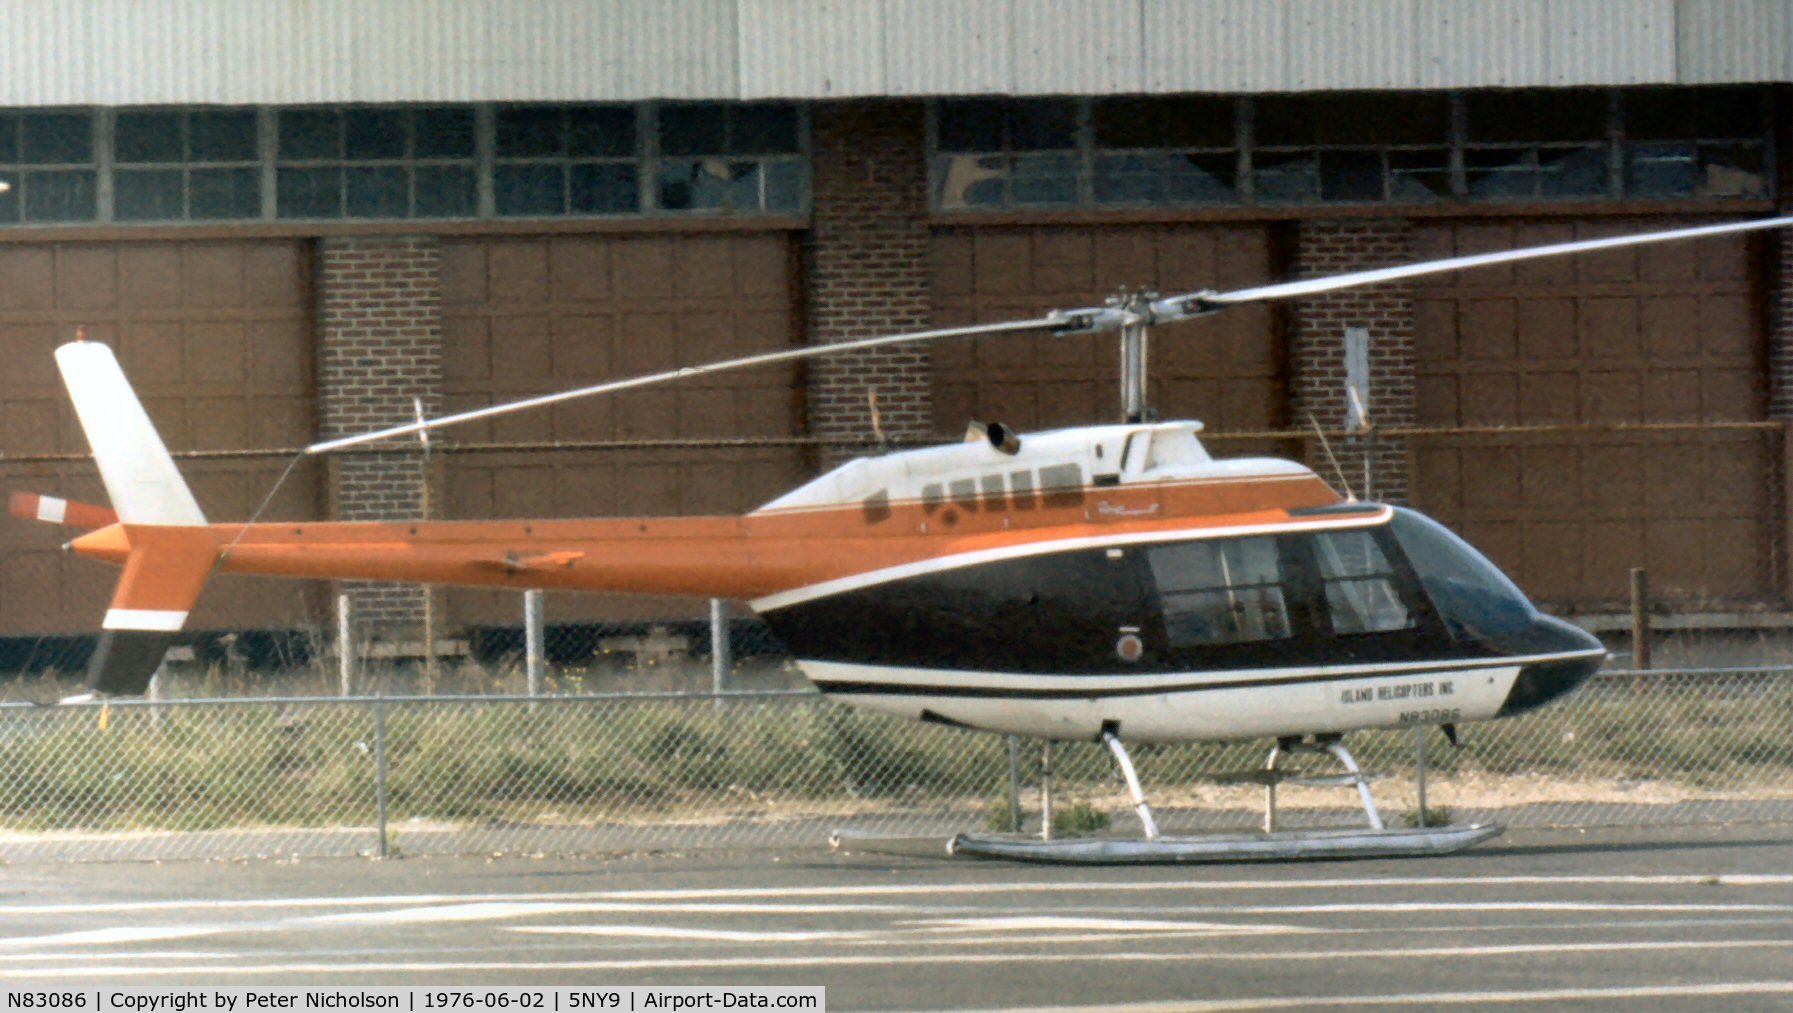 N83086, 1972 Bell 206B JetRanger C/N 914, Seen at Roosevelt Heliport on Long Island operated by Island Helicopters Inc in 1976